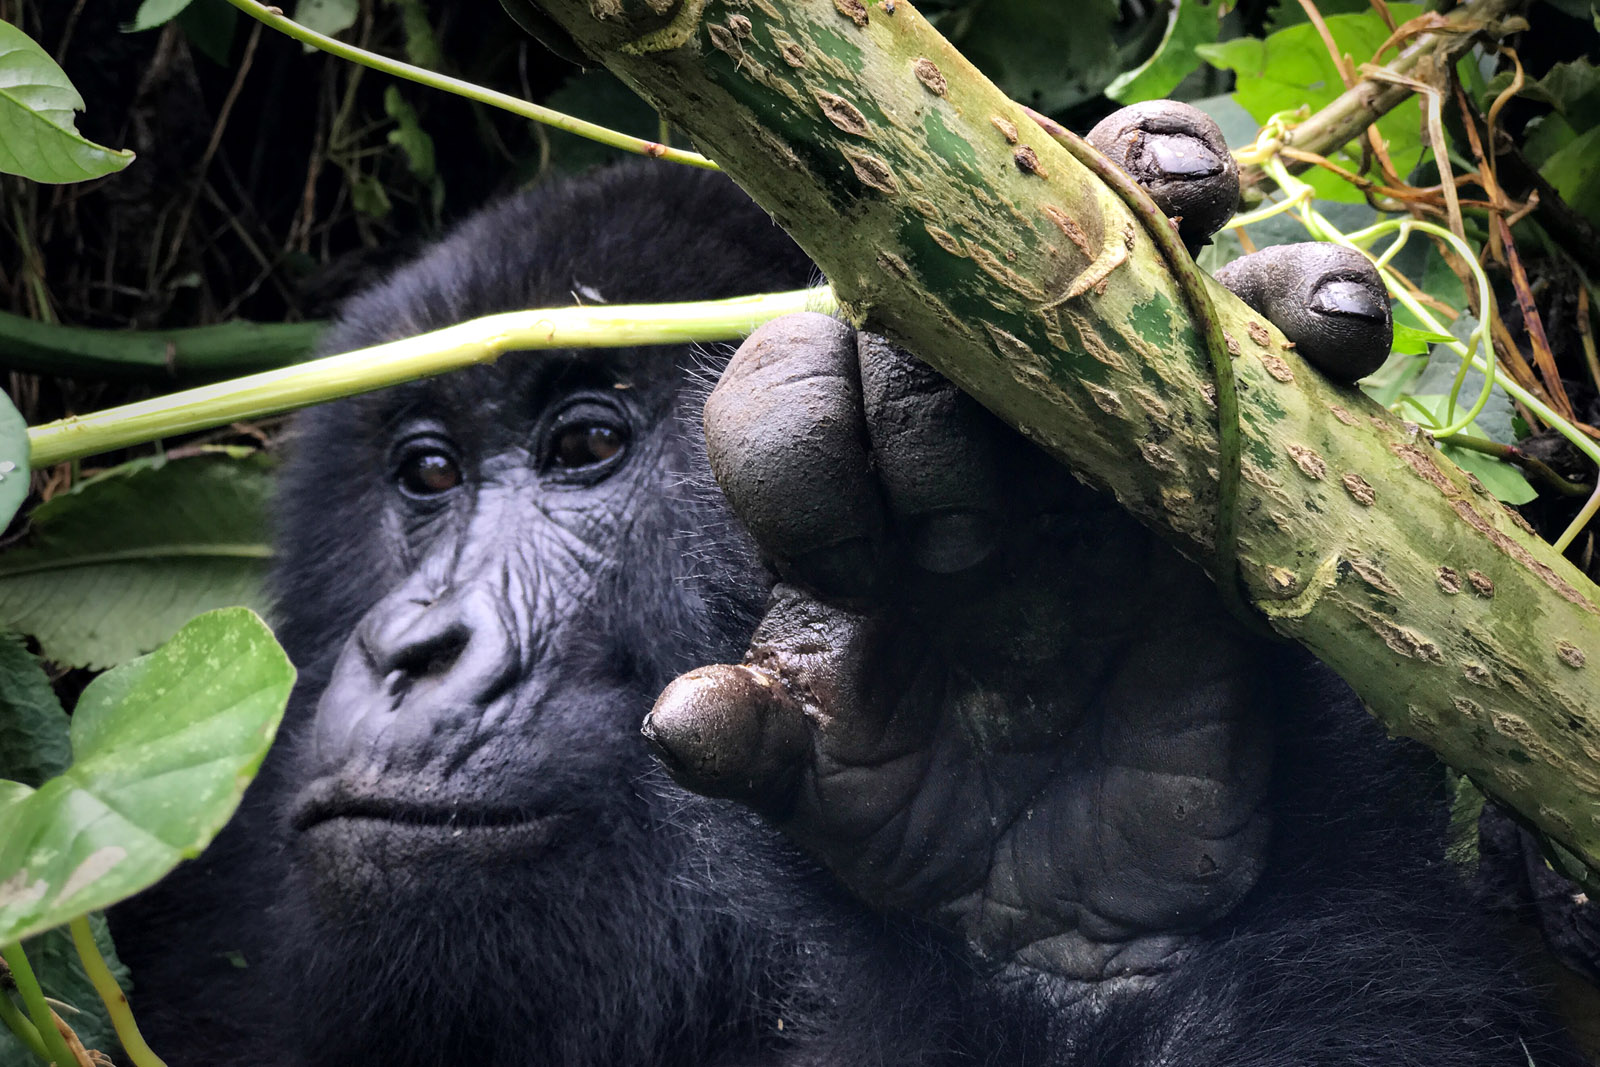  These silverbacks spend all day tearing up plants, eating bamboo, and beating their chest. It’s a rare and special experience to witness them in the wild. 